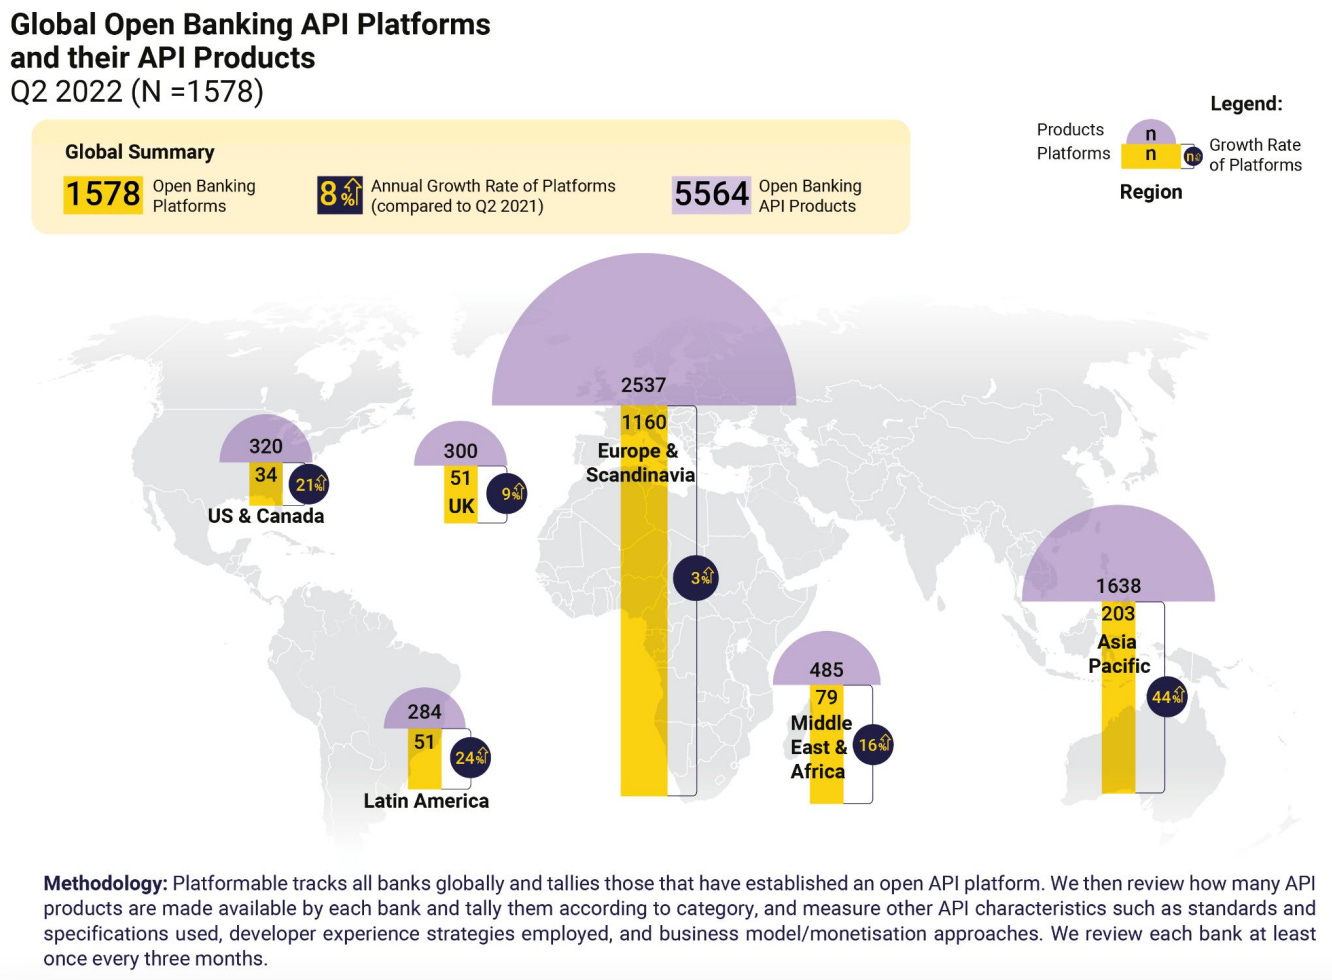 Global open banking API platforms and their API products, Source: Open Banking/Open Finance Trends Q3 2022, Platformable